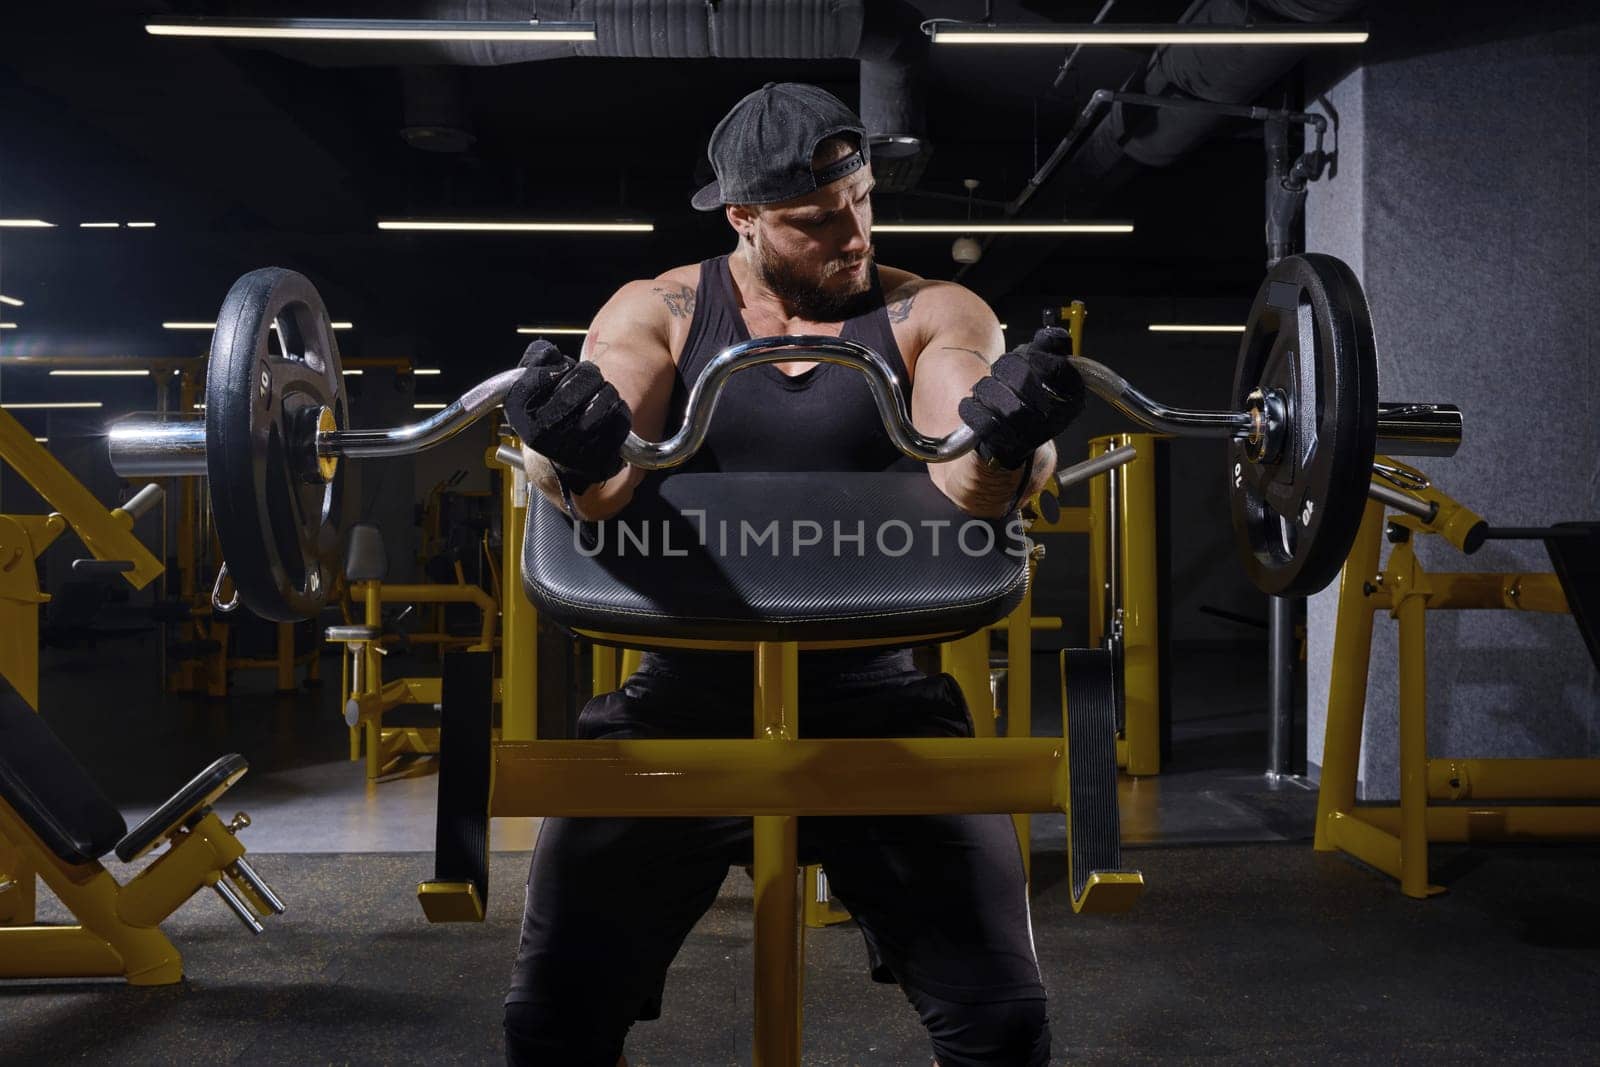 Tattooed, bearded athlete in black sport gloves, shorts, vest and cap. He is lifting a barbell, training his biceps while sitting on preacher curl bench at dark gym with yellow equipment. Close up